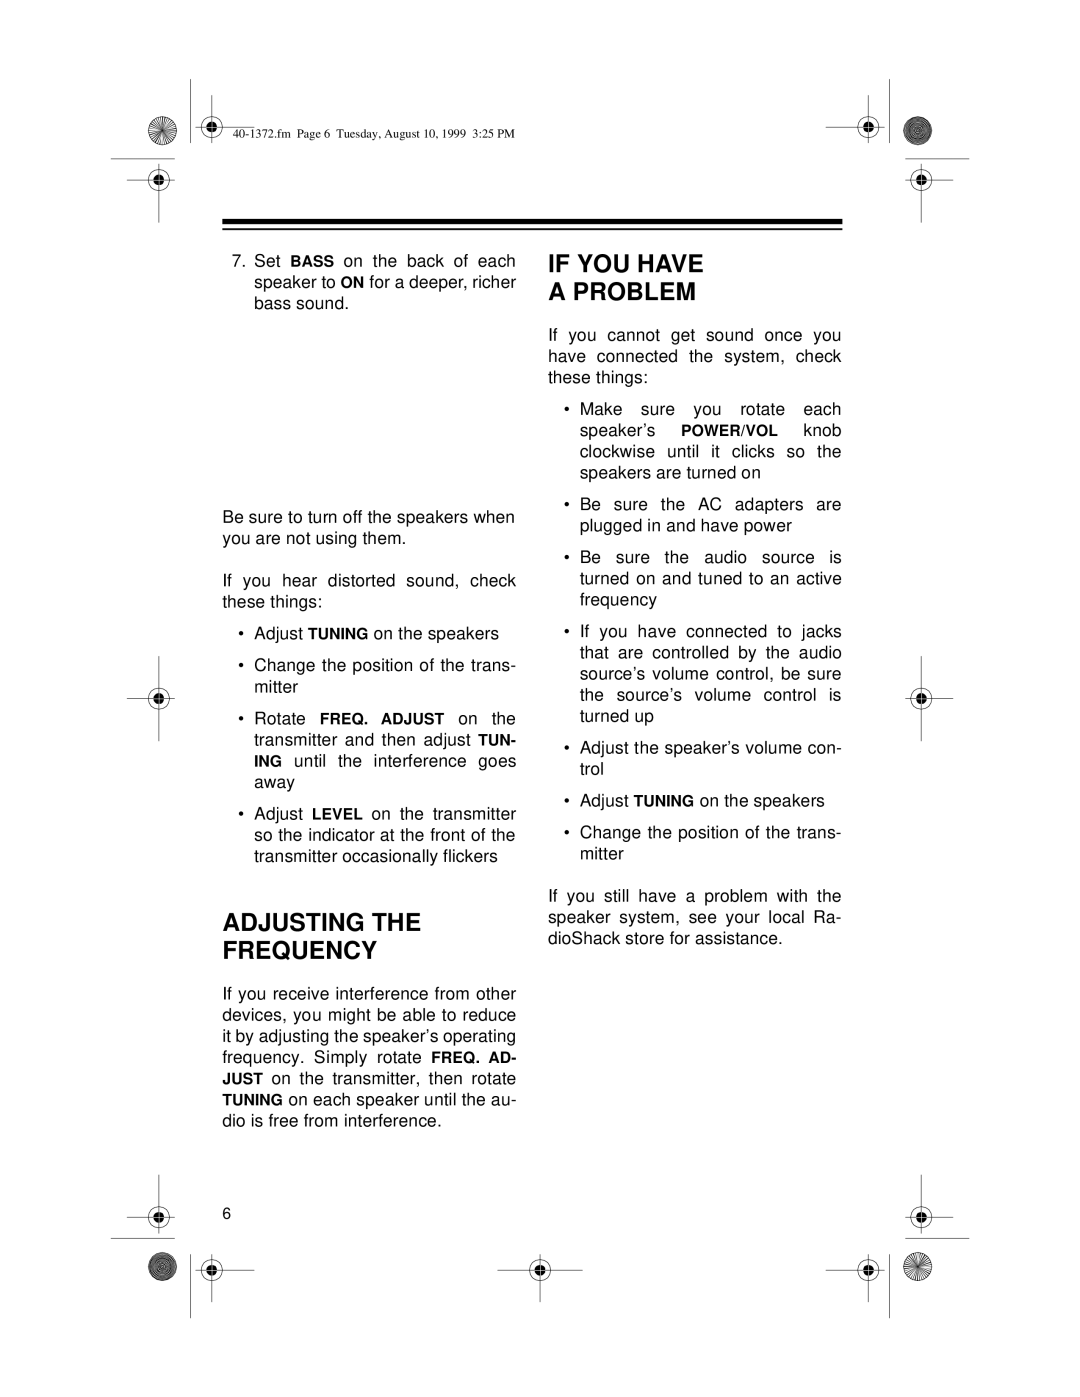 Panasonic AMX-25 owner manual Adjusting The Frequency, If You Have A Problem 